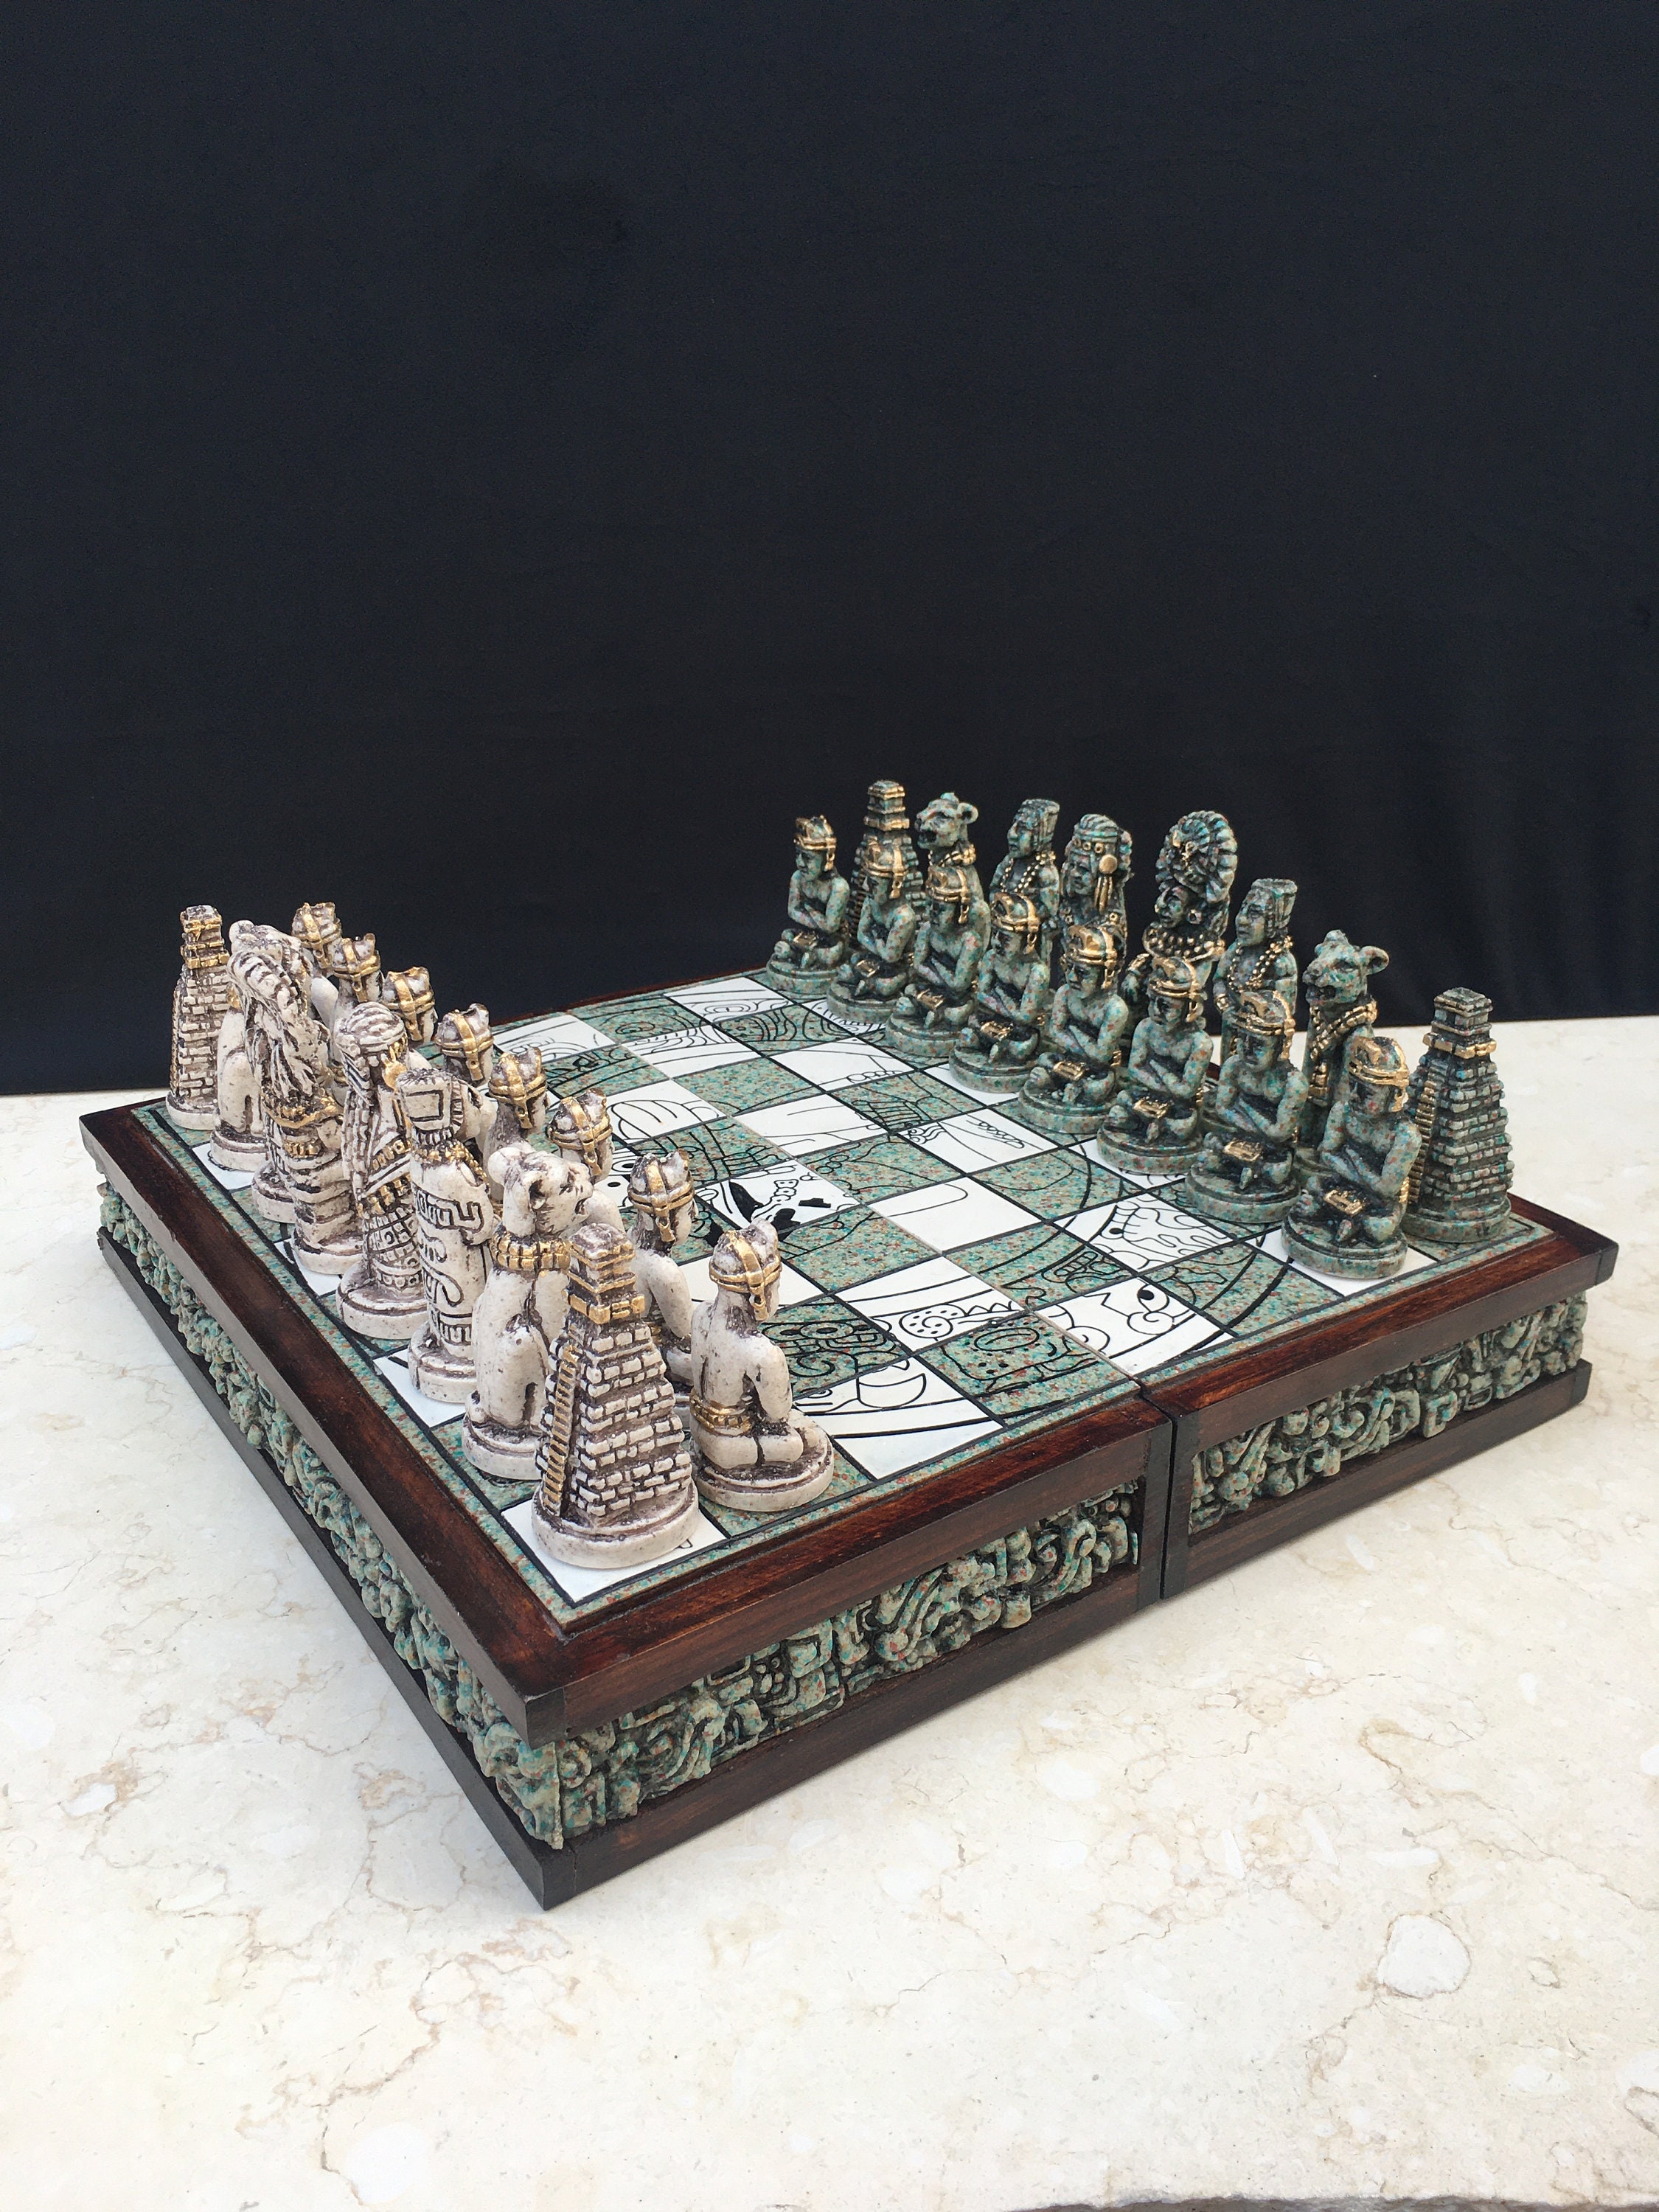 Chess Set Maya Chess Set Inspired by the Culture of Mexico - Etsy